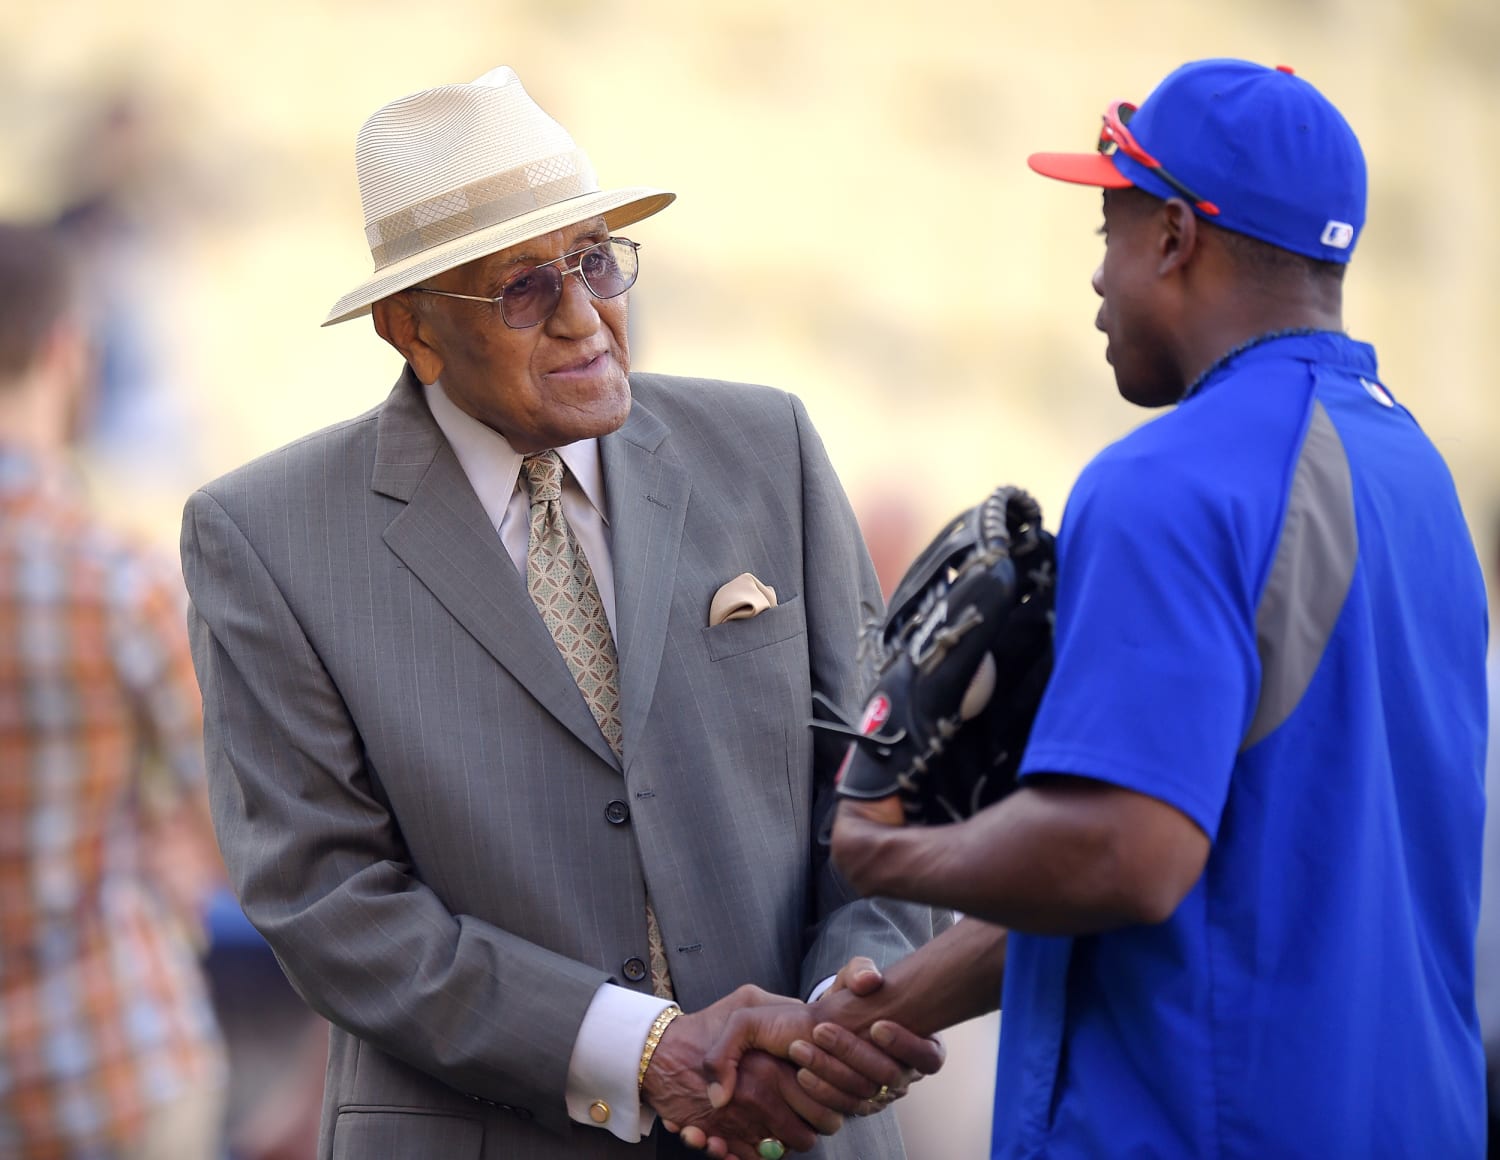 Dodgers Salute Don Newcombe 